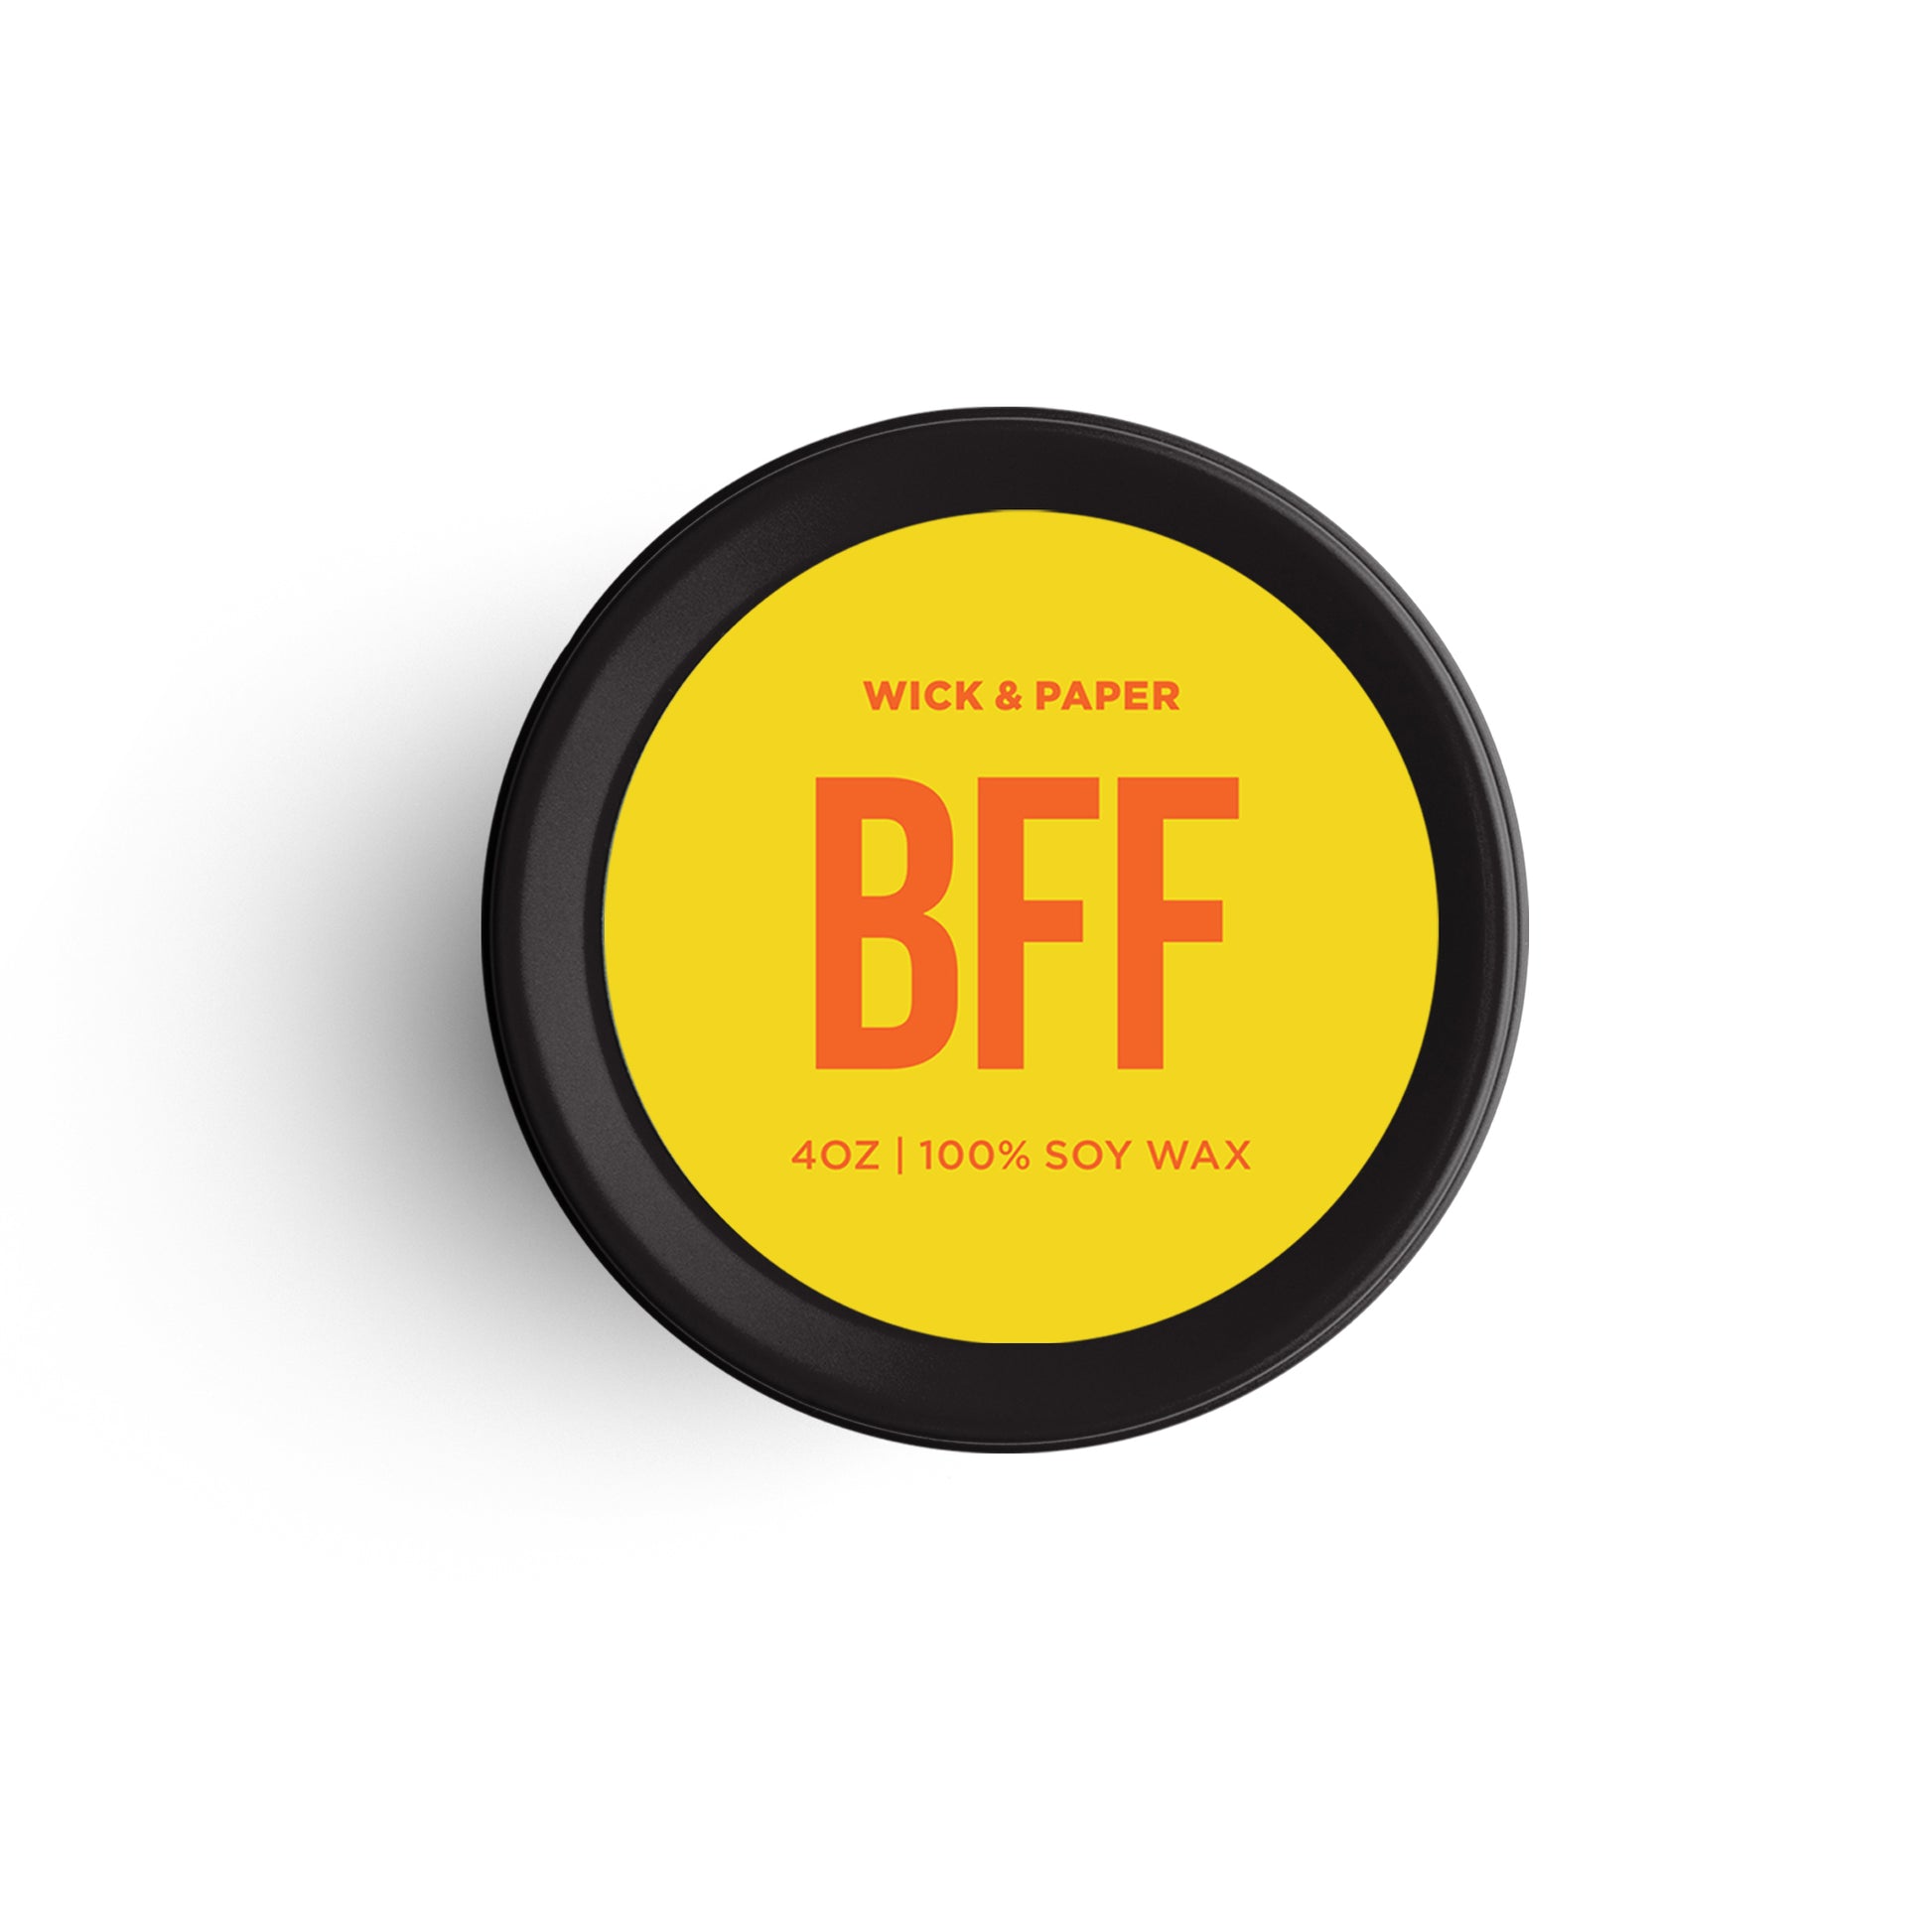 BFF, Best friends forever, candle by wick and paper